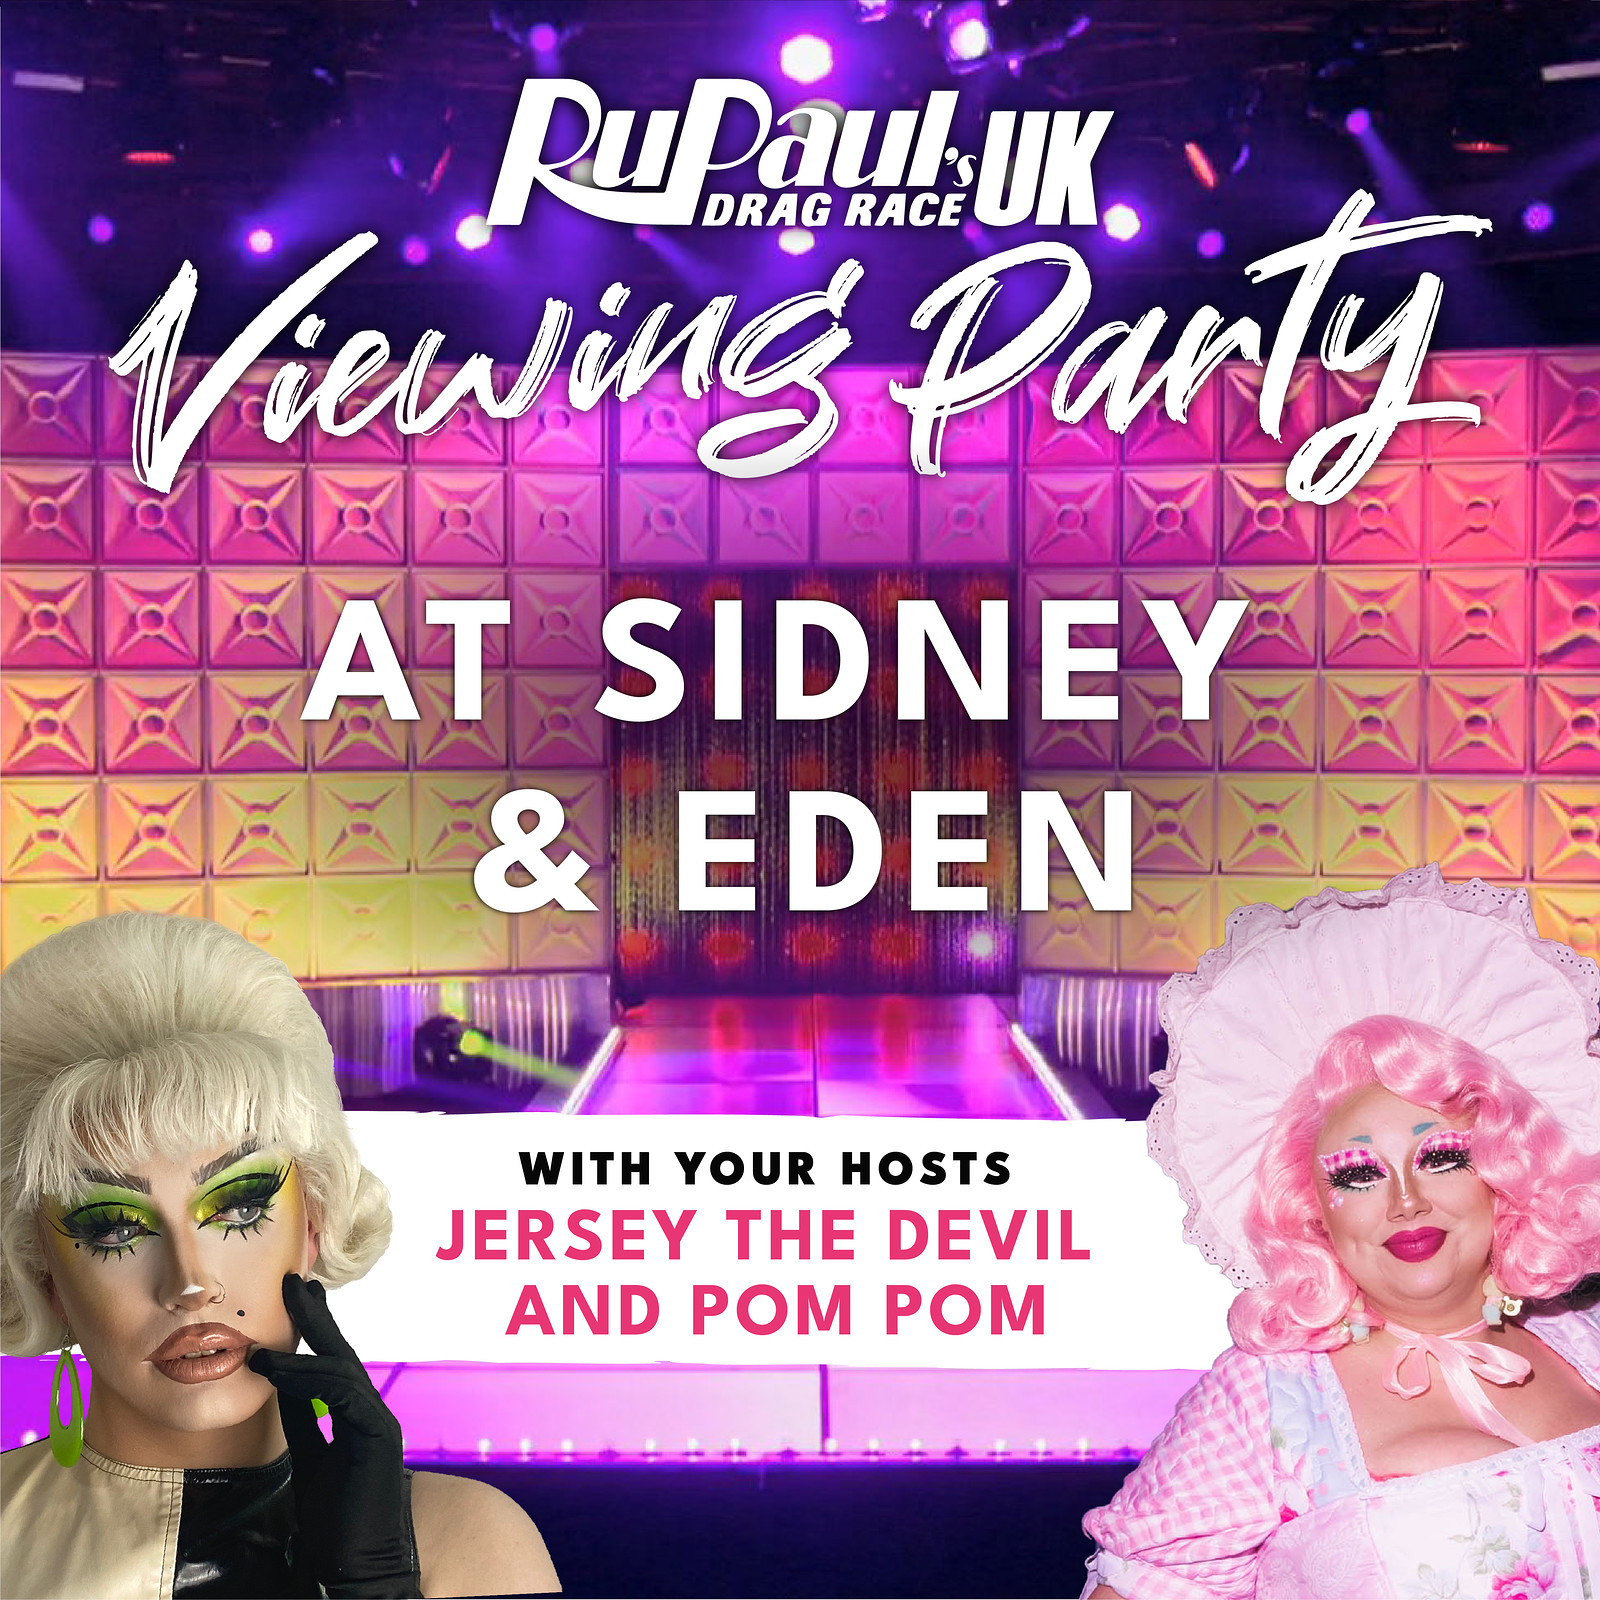 RuPaul's Drag Race UK Episode 4 Viewing Party at Sidney & Eden